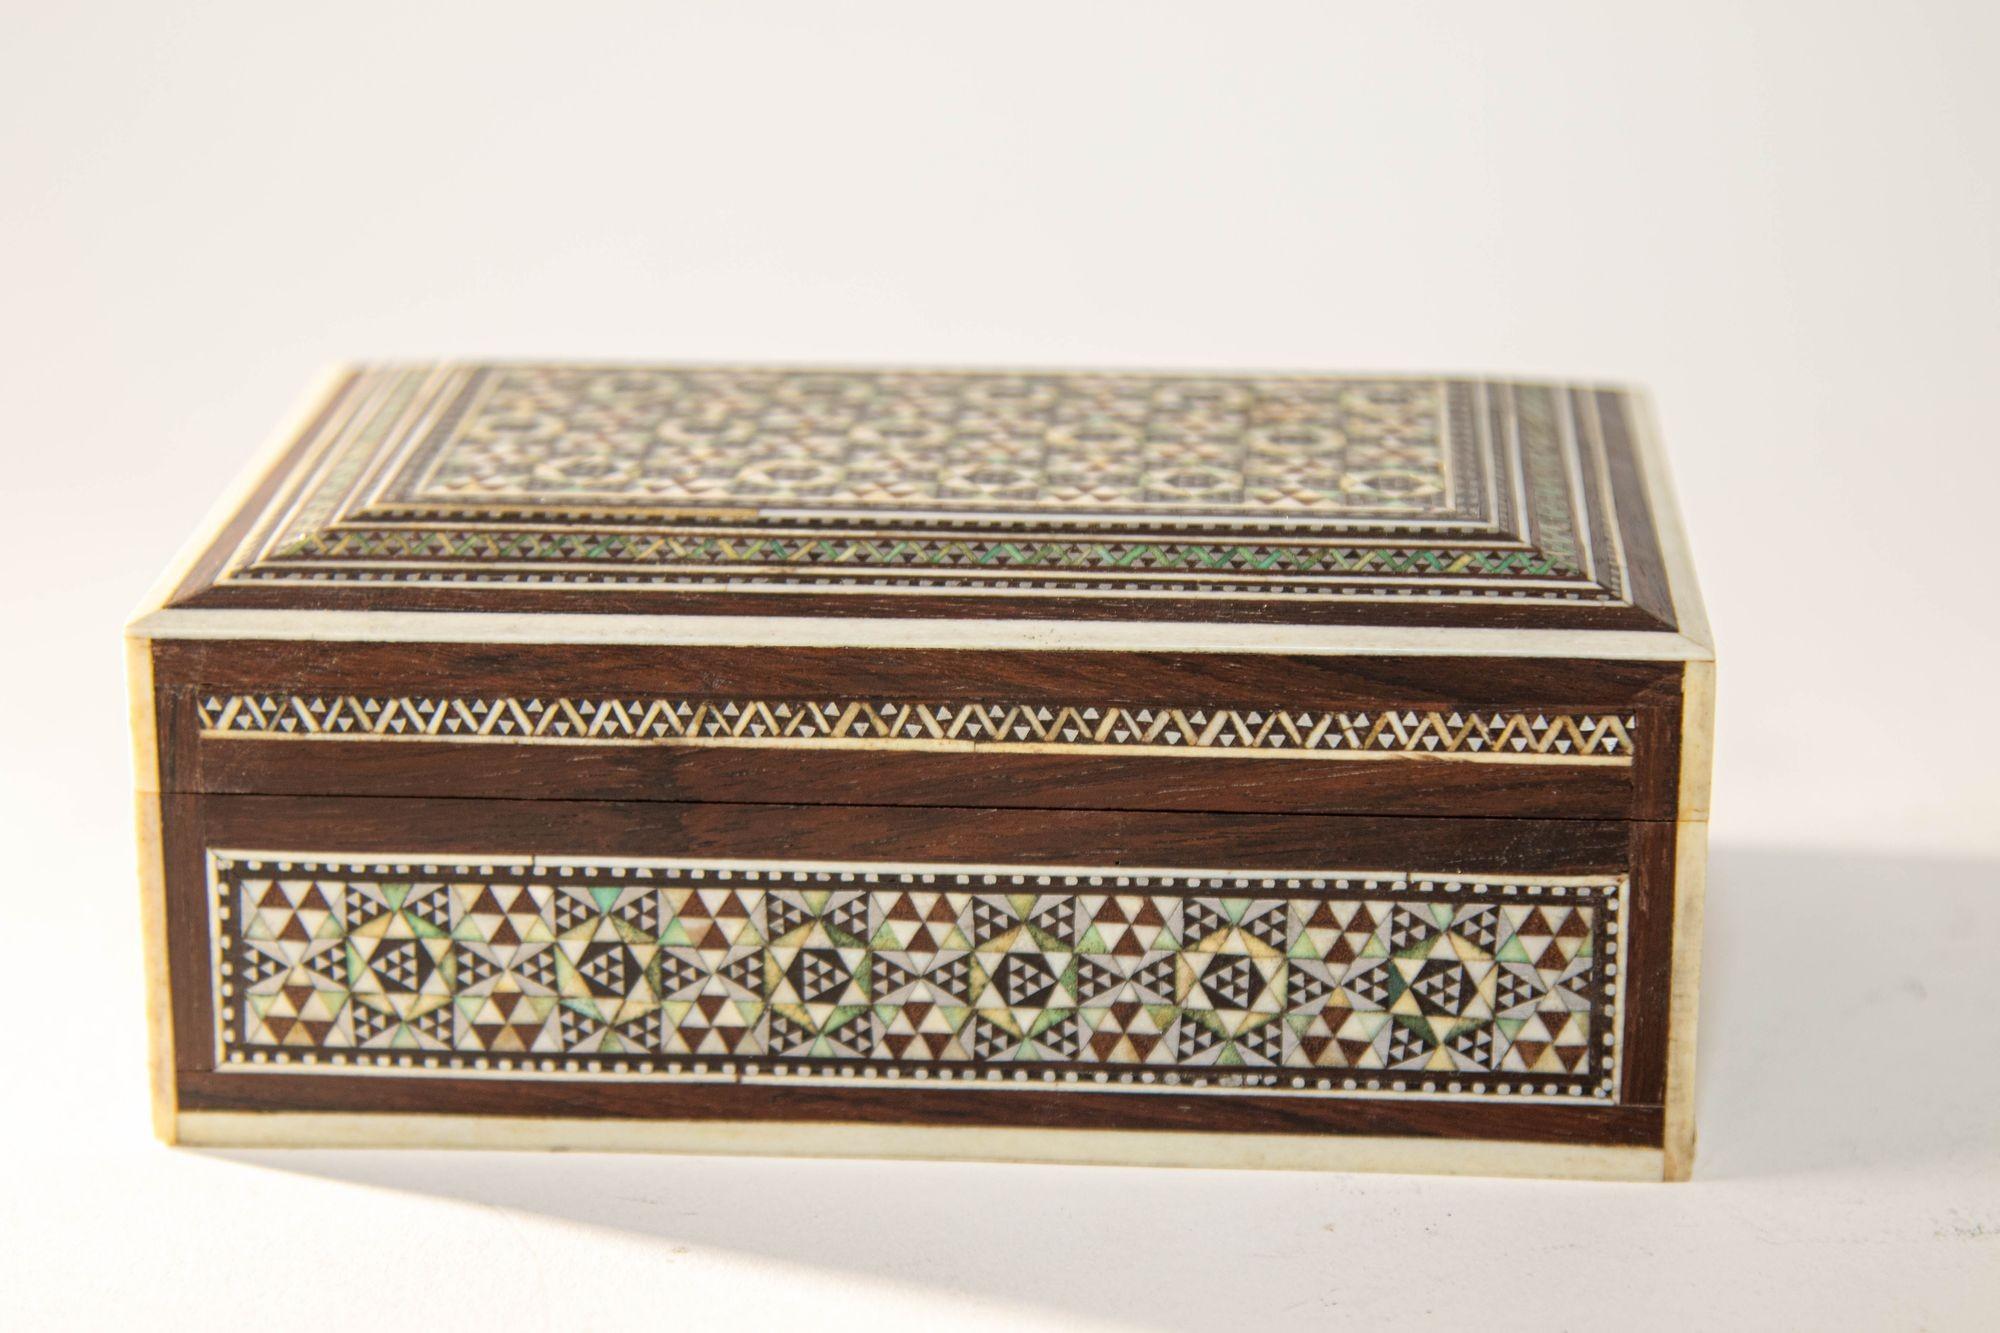 20th Century 1940s Mother of Pearl Inlaid Decorative Middle Eastern Islamic Box For Sale